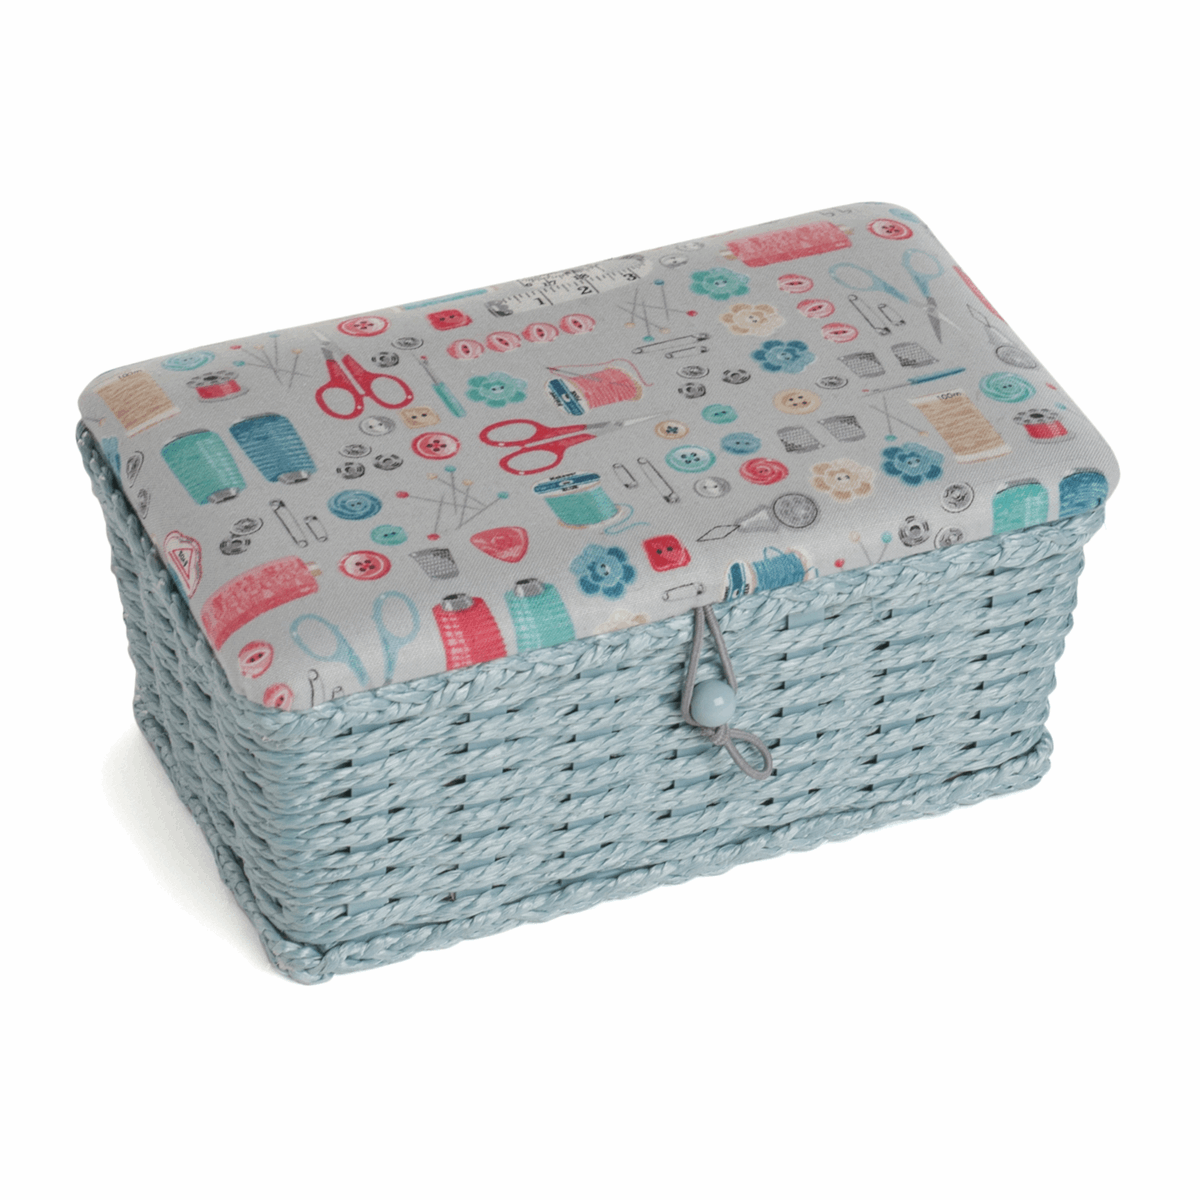 SEWING BOX - WOVEN BASKET - STITCH IN TIME